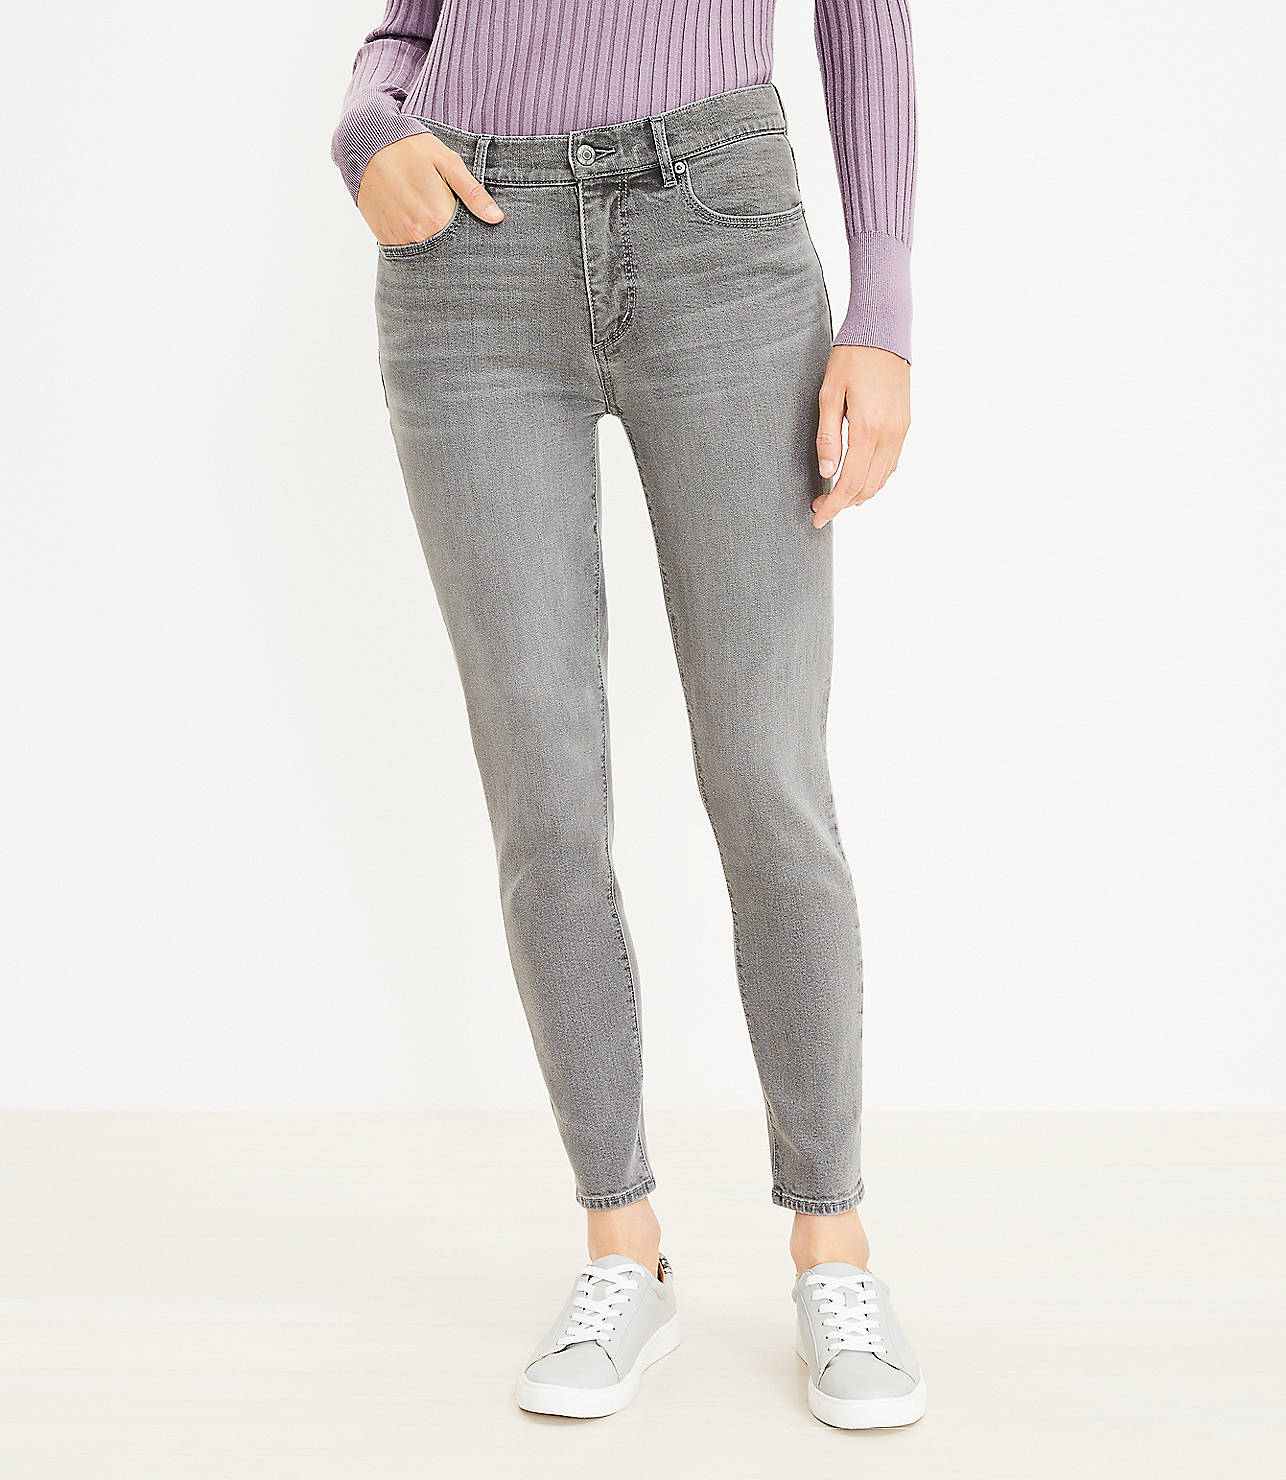 Curvy Mid Rise Skinny Jeans in Staple Grey Wash